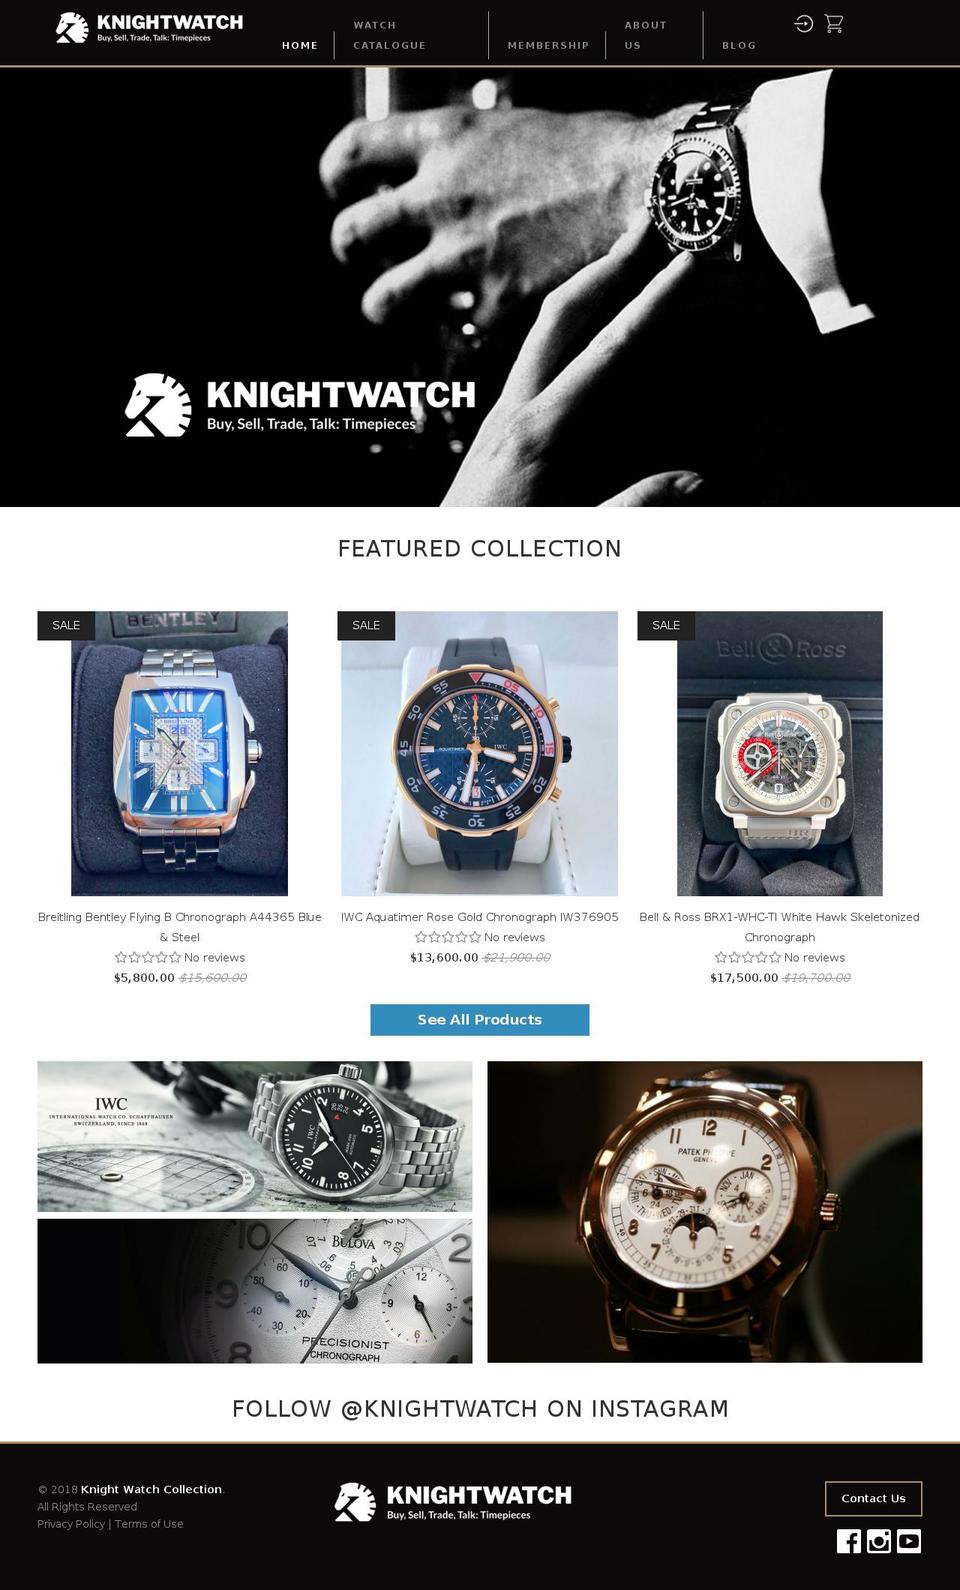 Avone Shopify theme site example knightwatchcollection.com